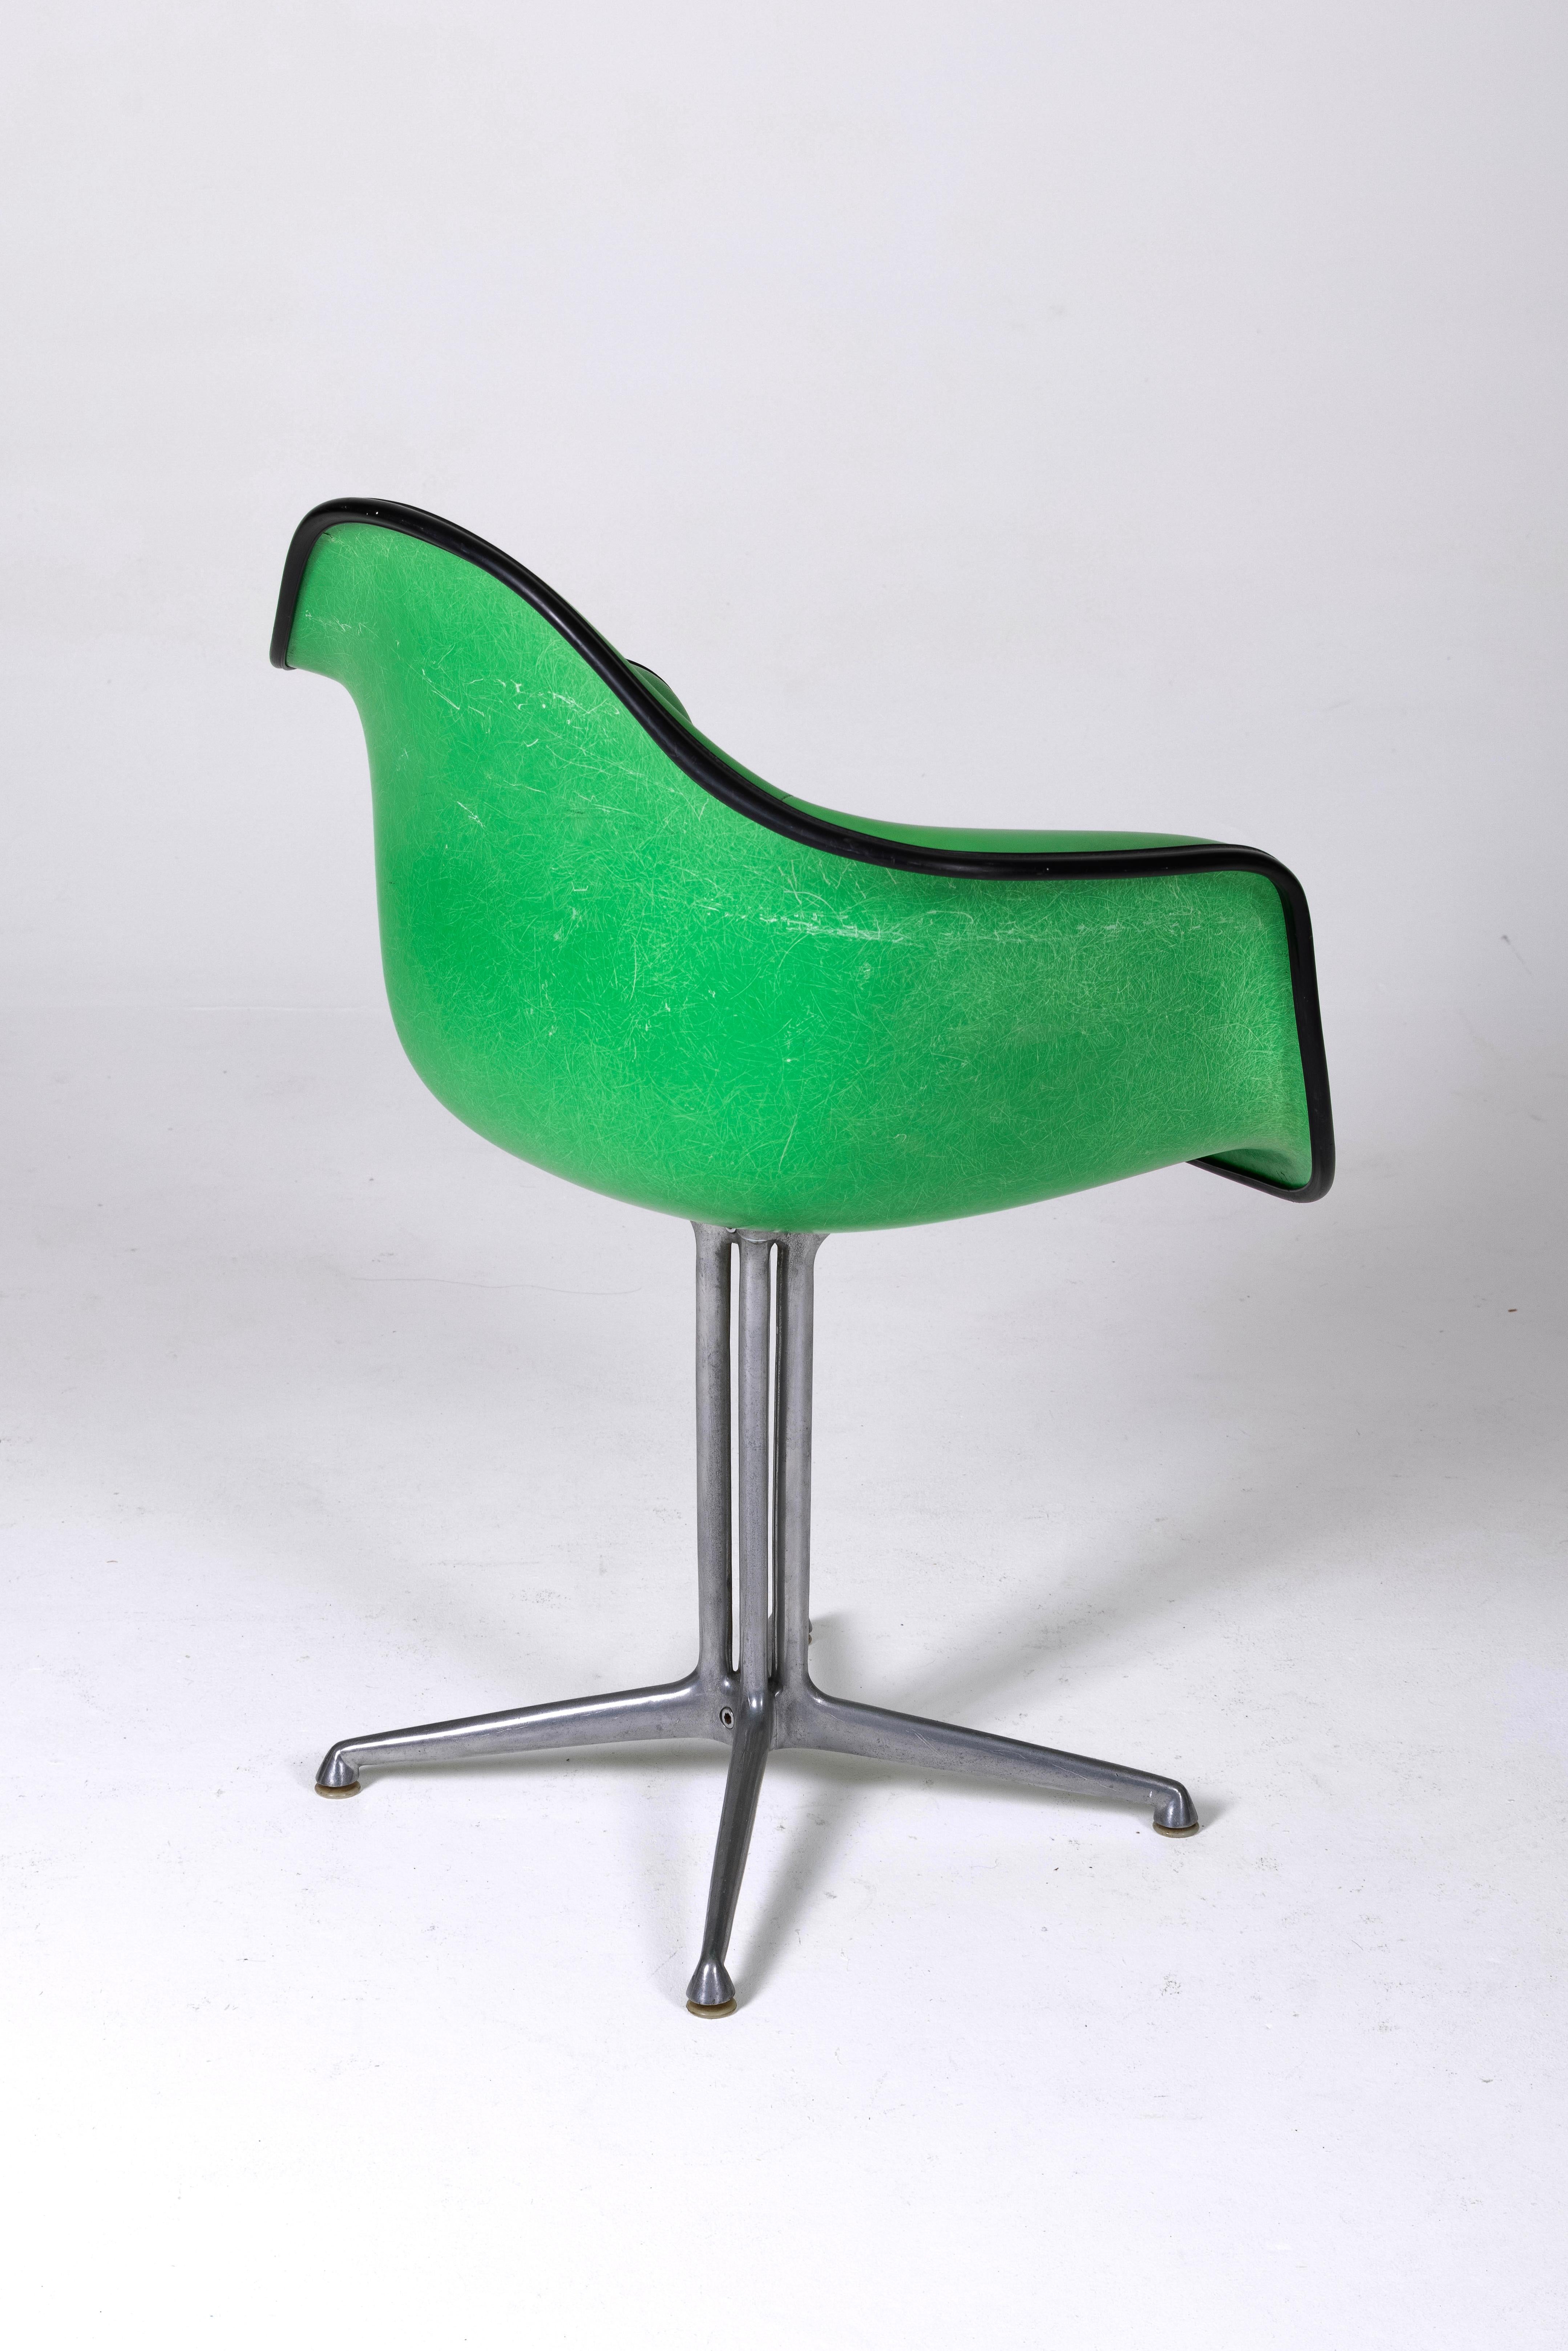 Charles and Ray Eames' Eames Plastic leather armchair. 2